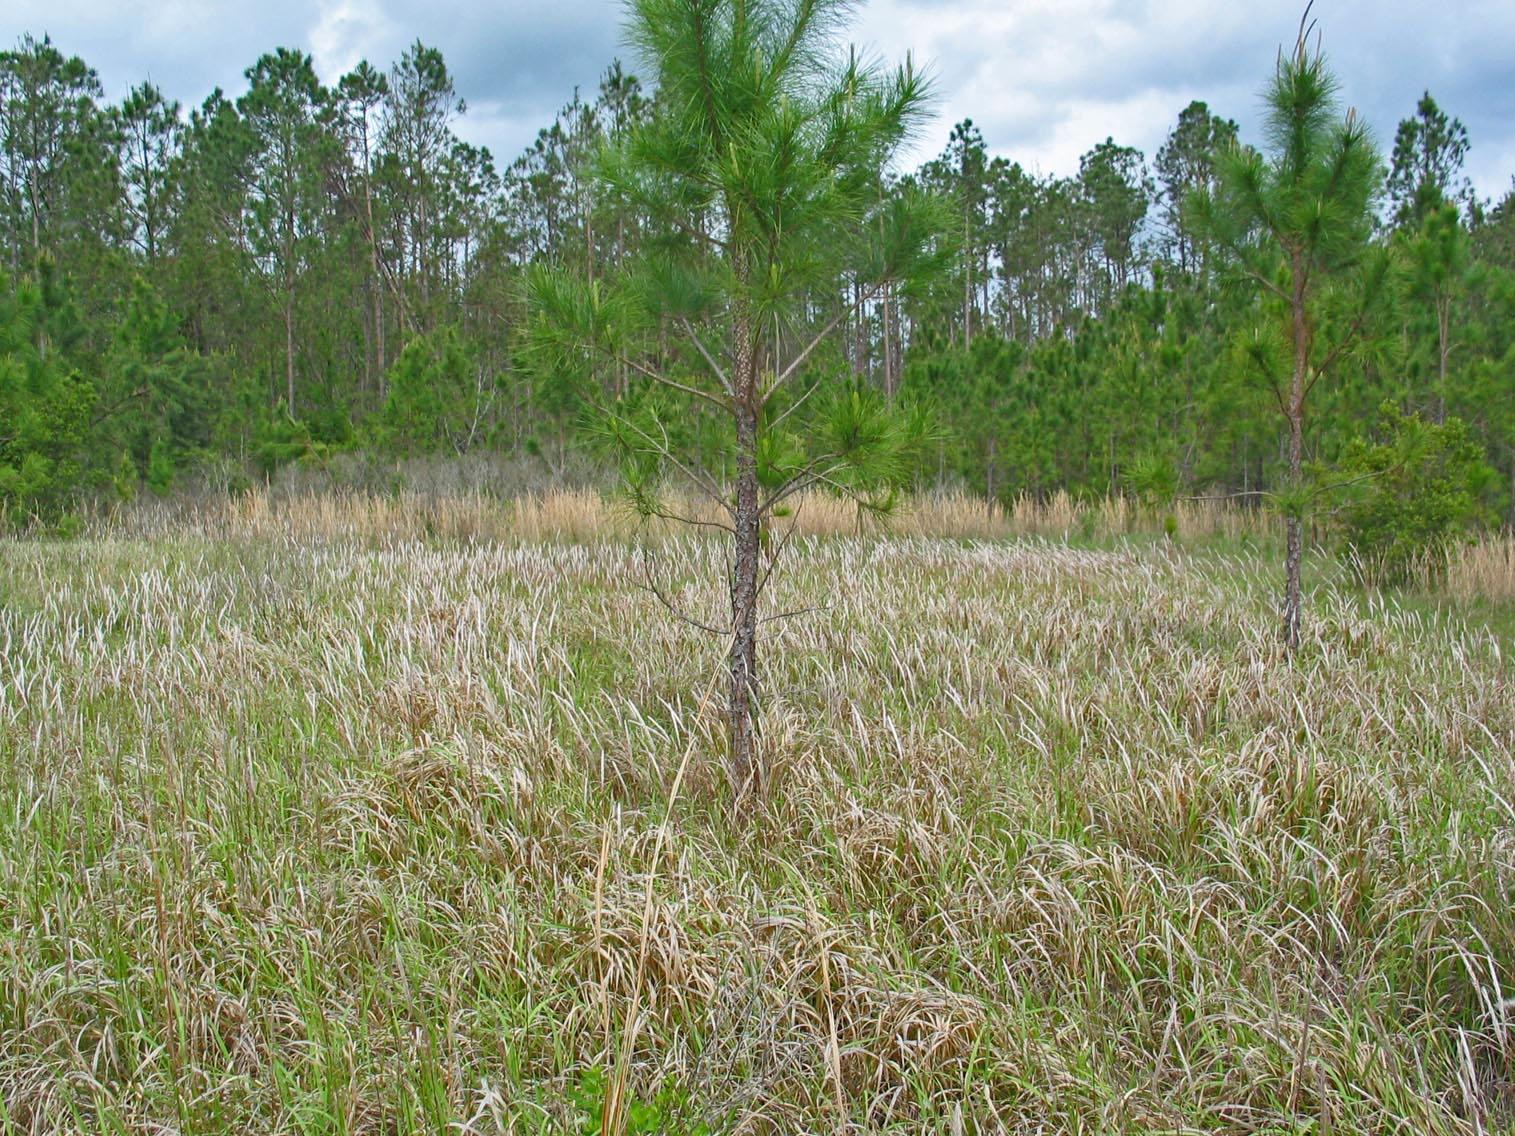 Cogongrass is not native to Mississippi, but the Asian import is spreading rapidly through the state, choking out native vegetation and causing problems for livestock and wildlife. (Photo by MSU Ag Communications/Bob Ratliff)